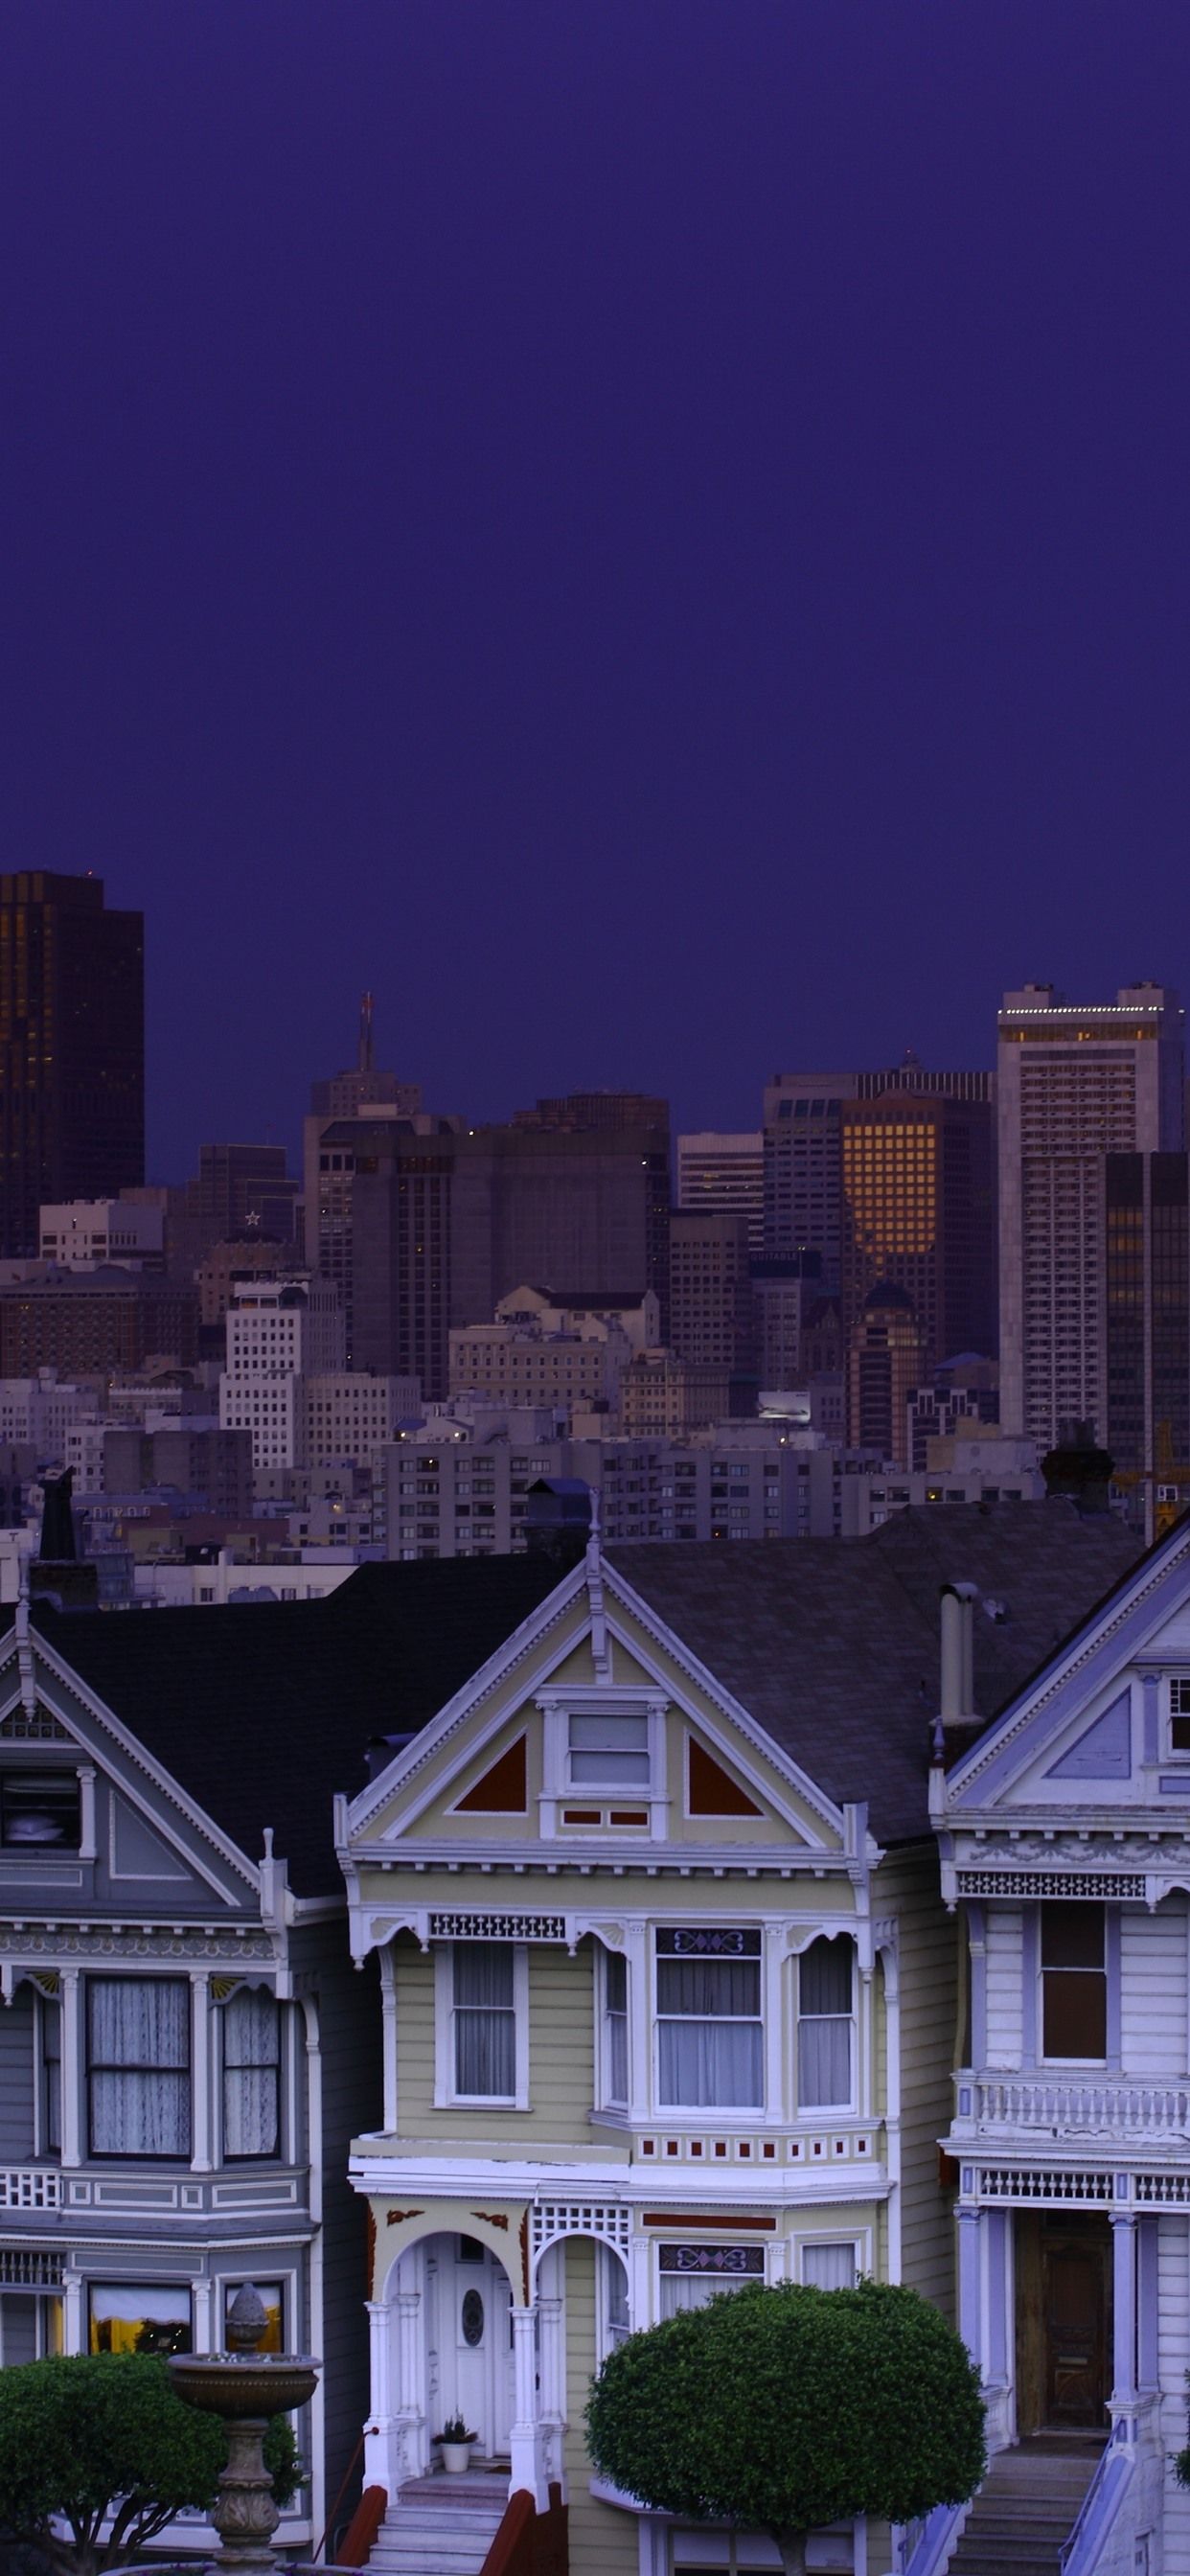 San Francisco, USA, City, Night, Houses, Moon 1242x2688 IPhone 11 Pro XS Max Wallpaper, Background, Picture, Image